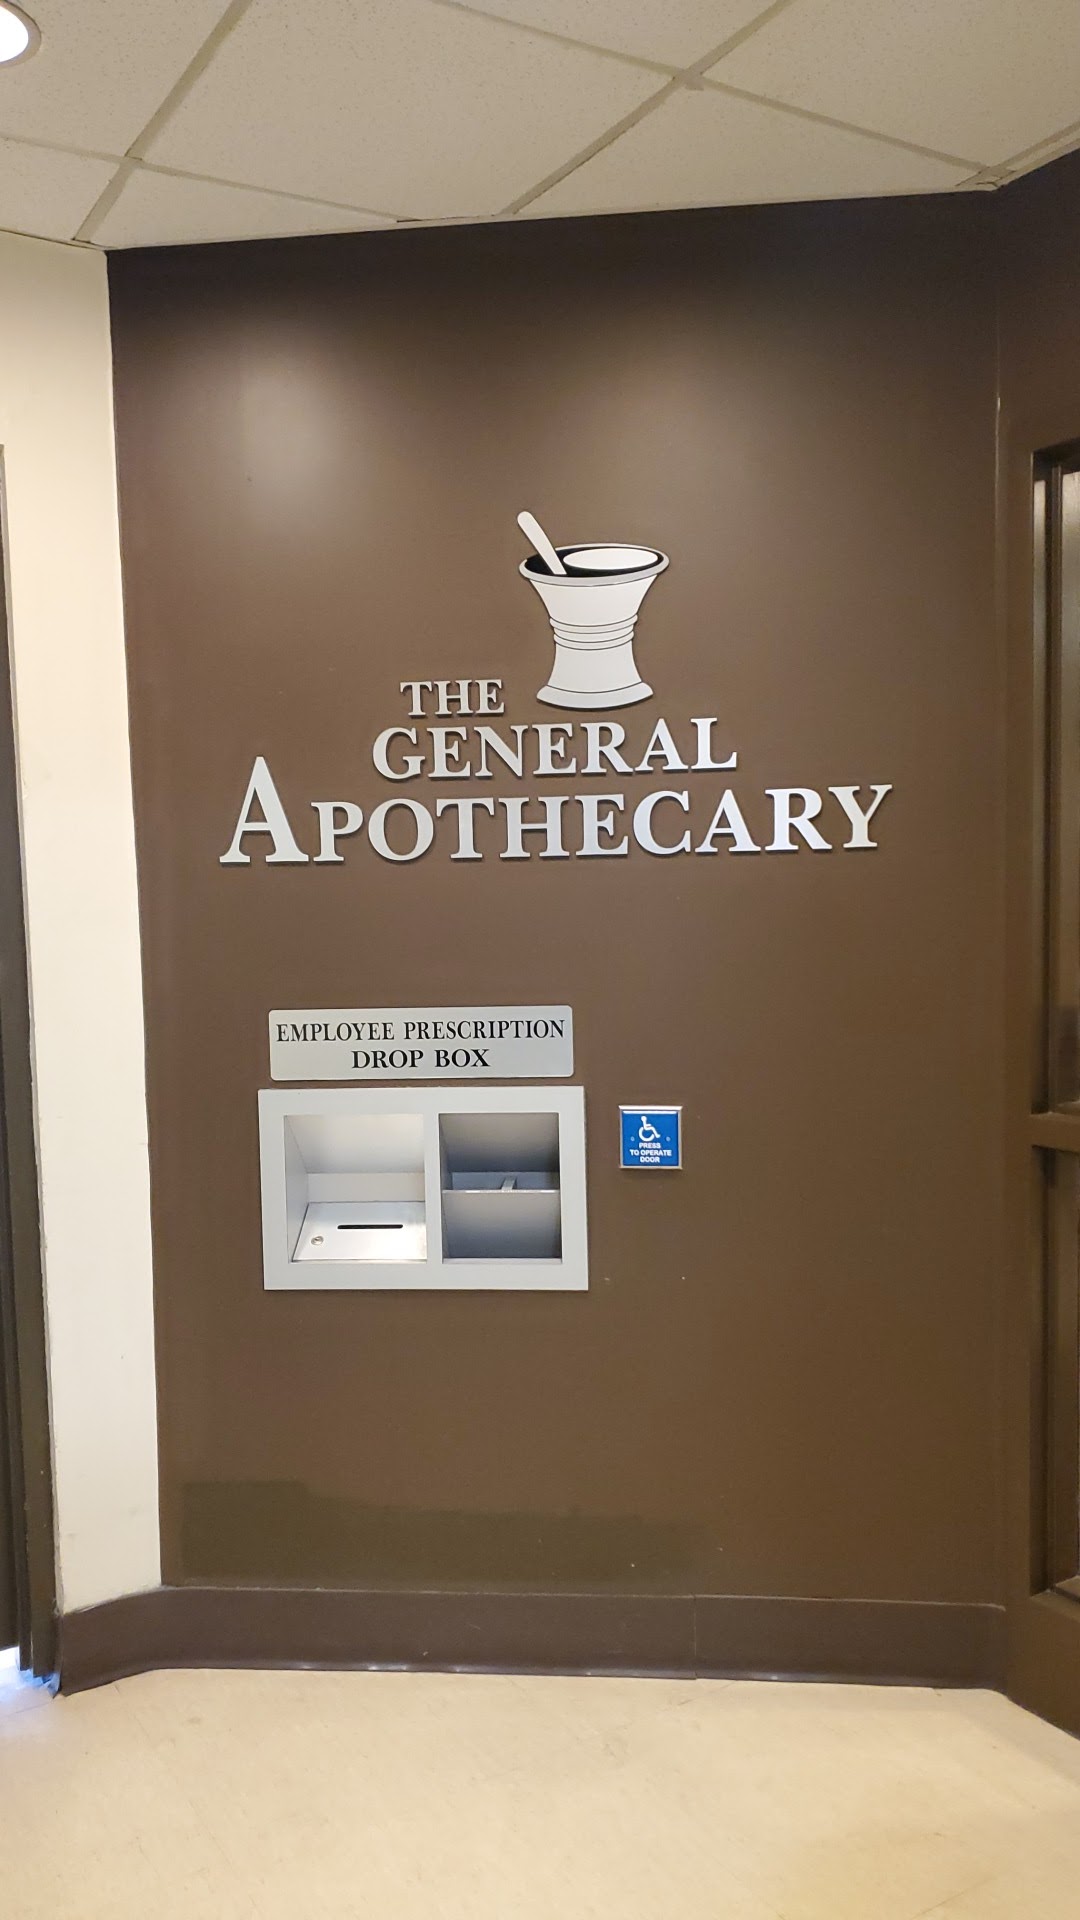 The General Apothecary